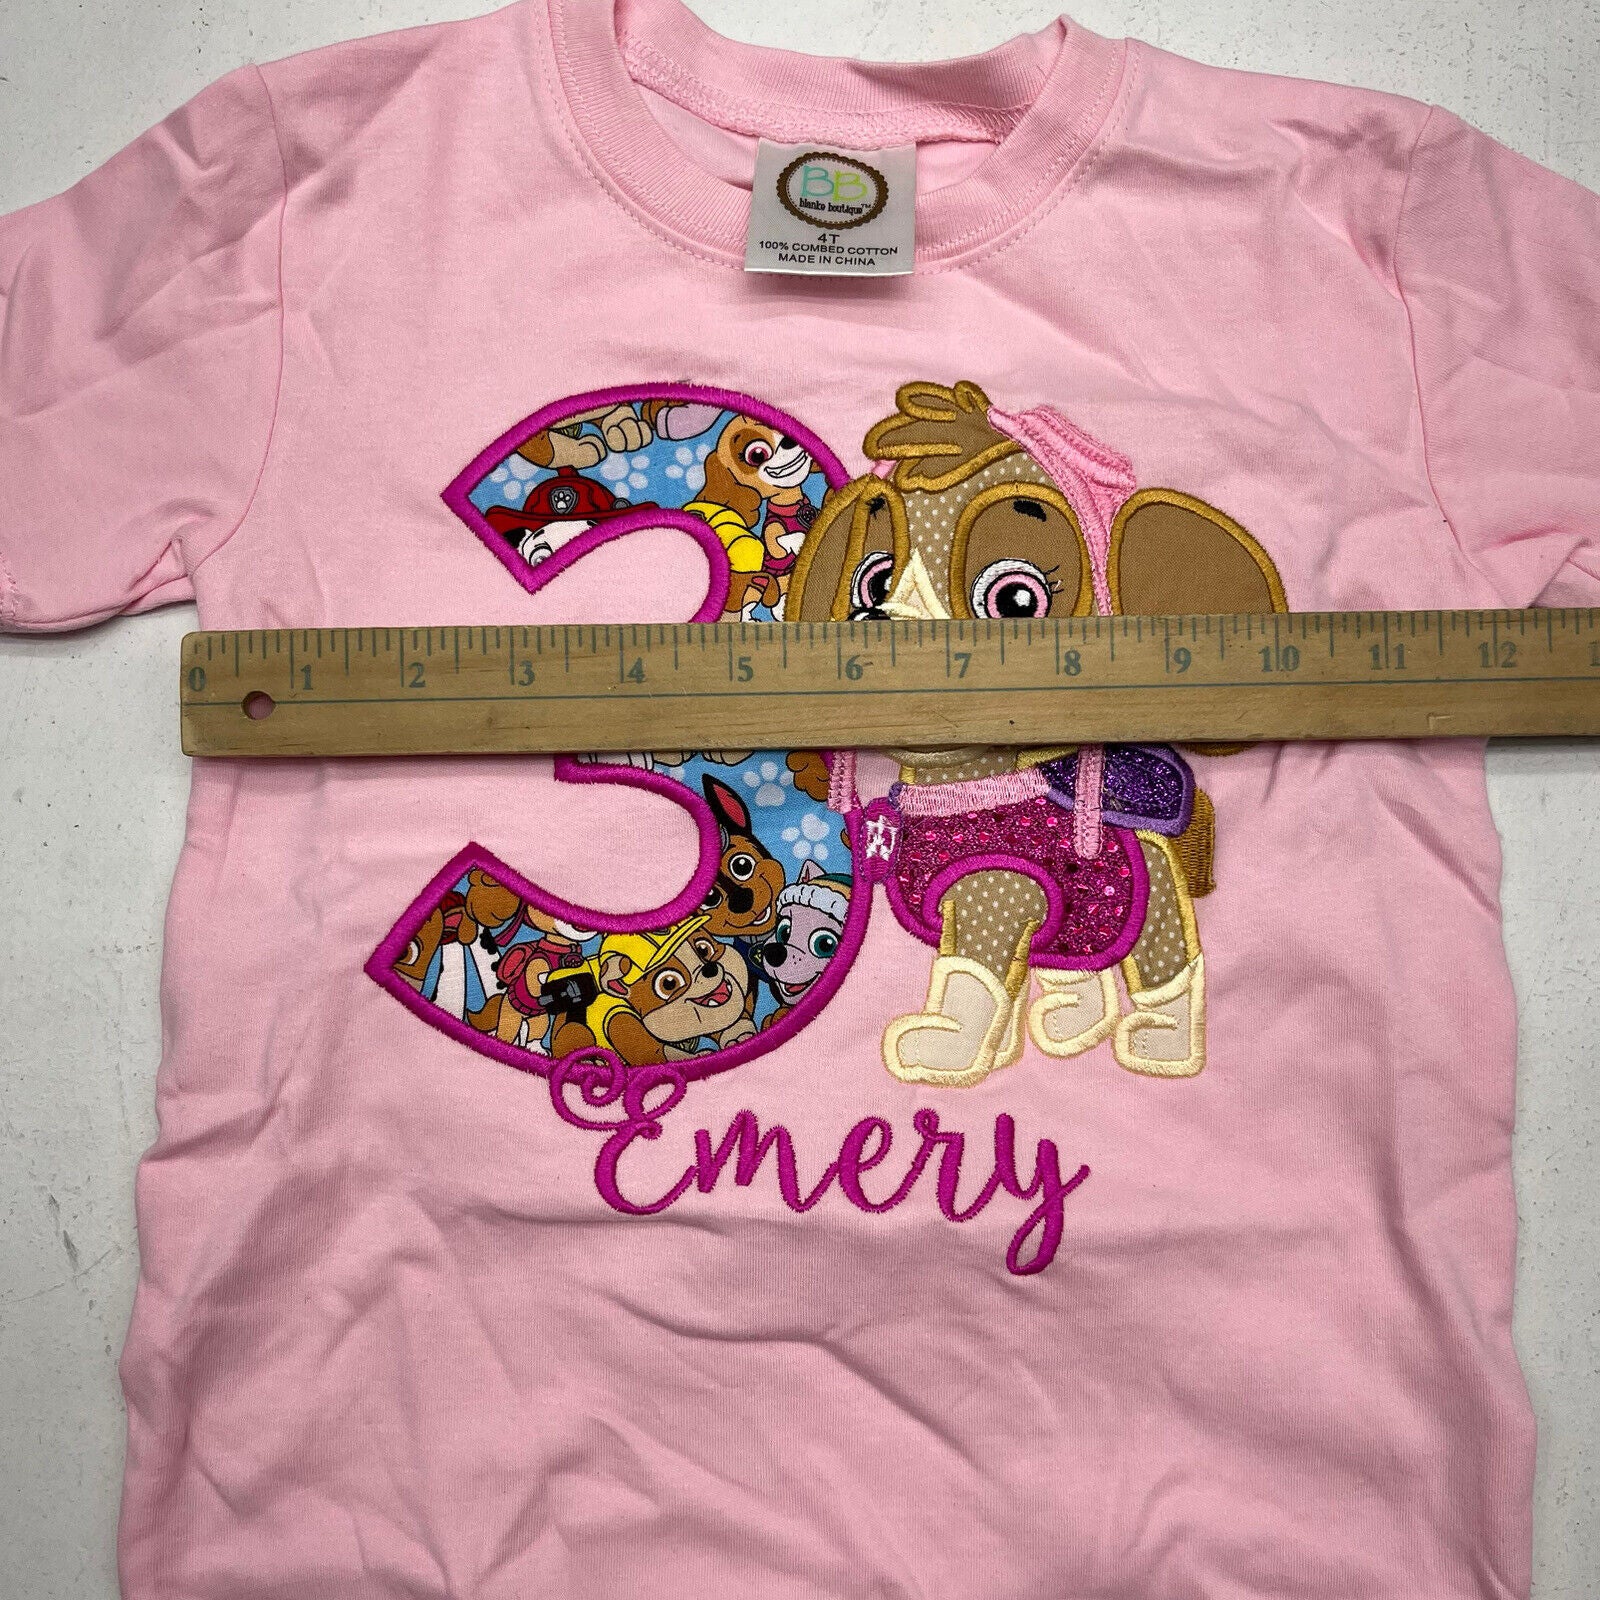 Blanke Boutique Pink Paw Patrol Short Sleeve T-Shirt Girls Size 4T NEW -  beyond exchange